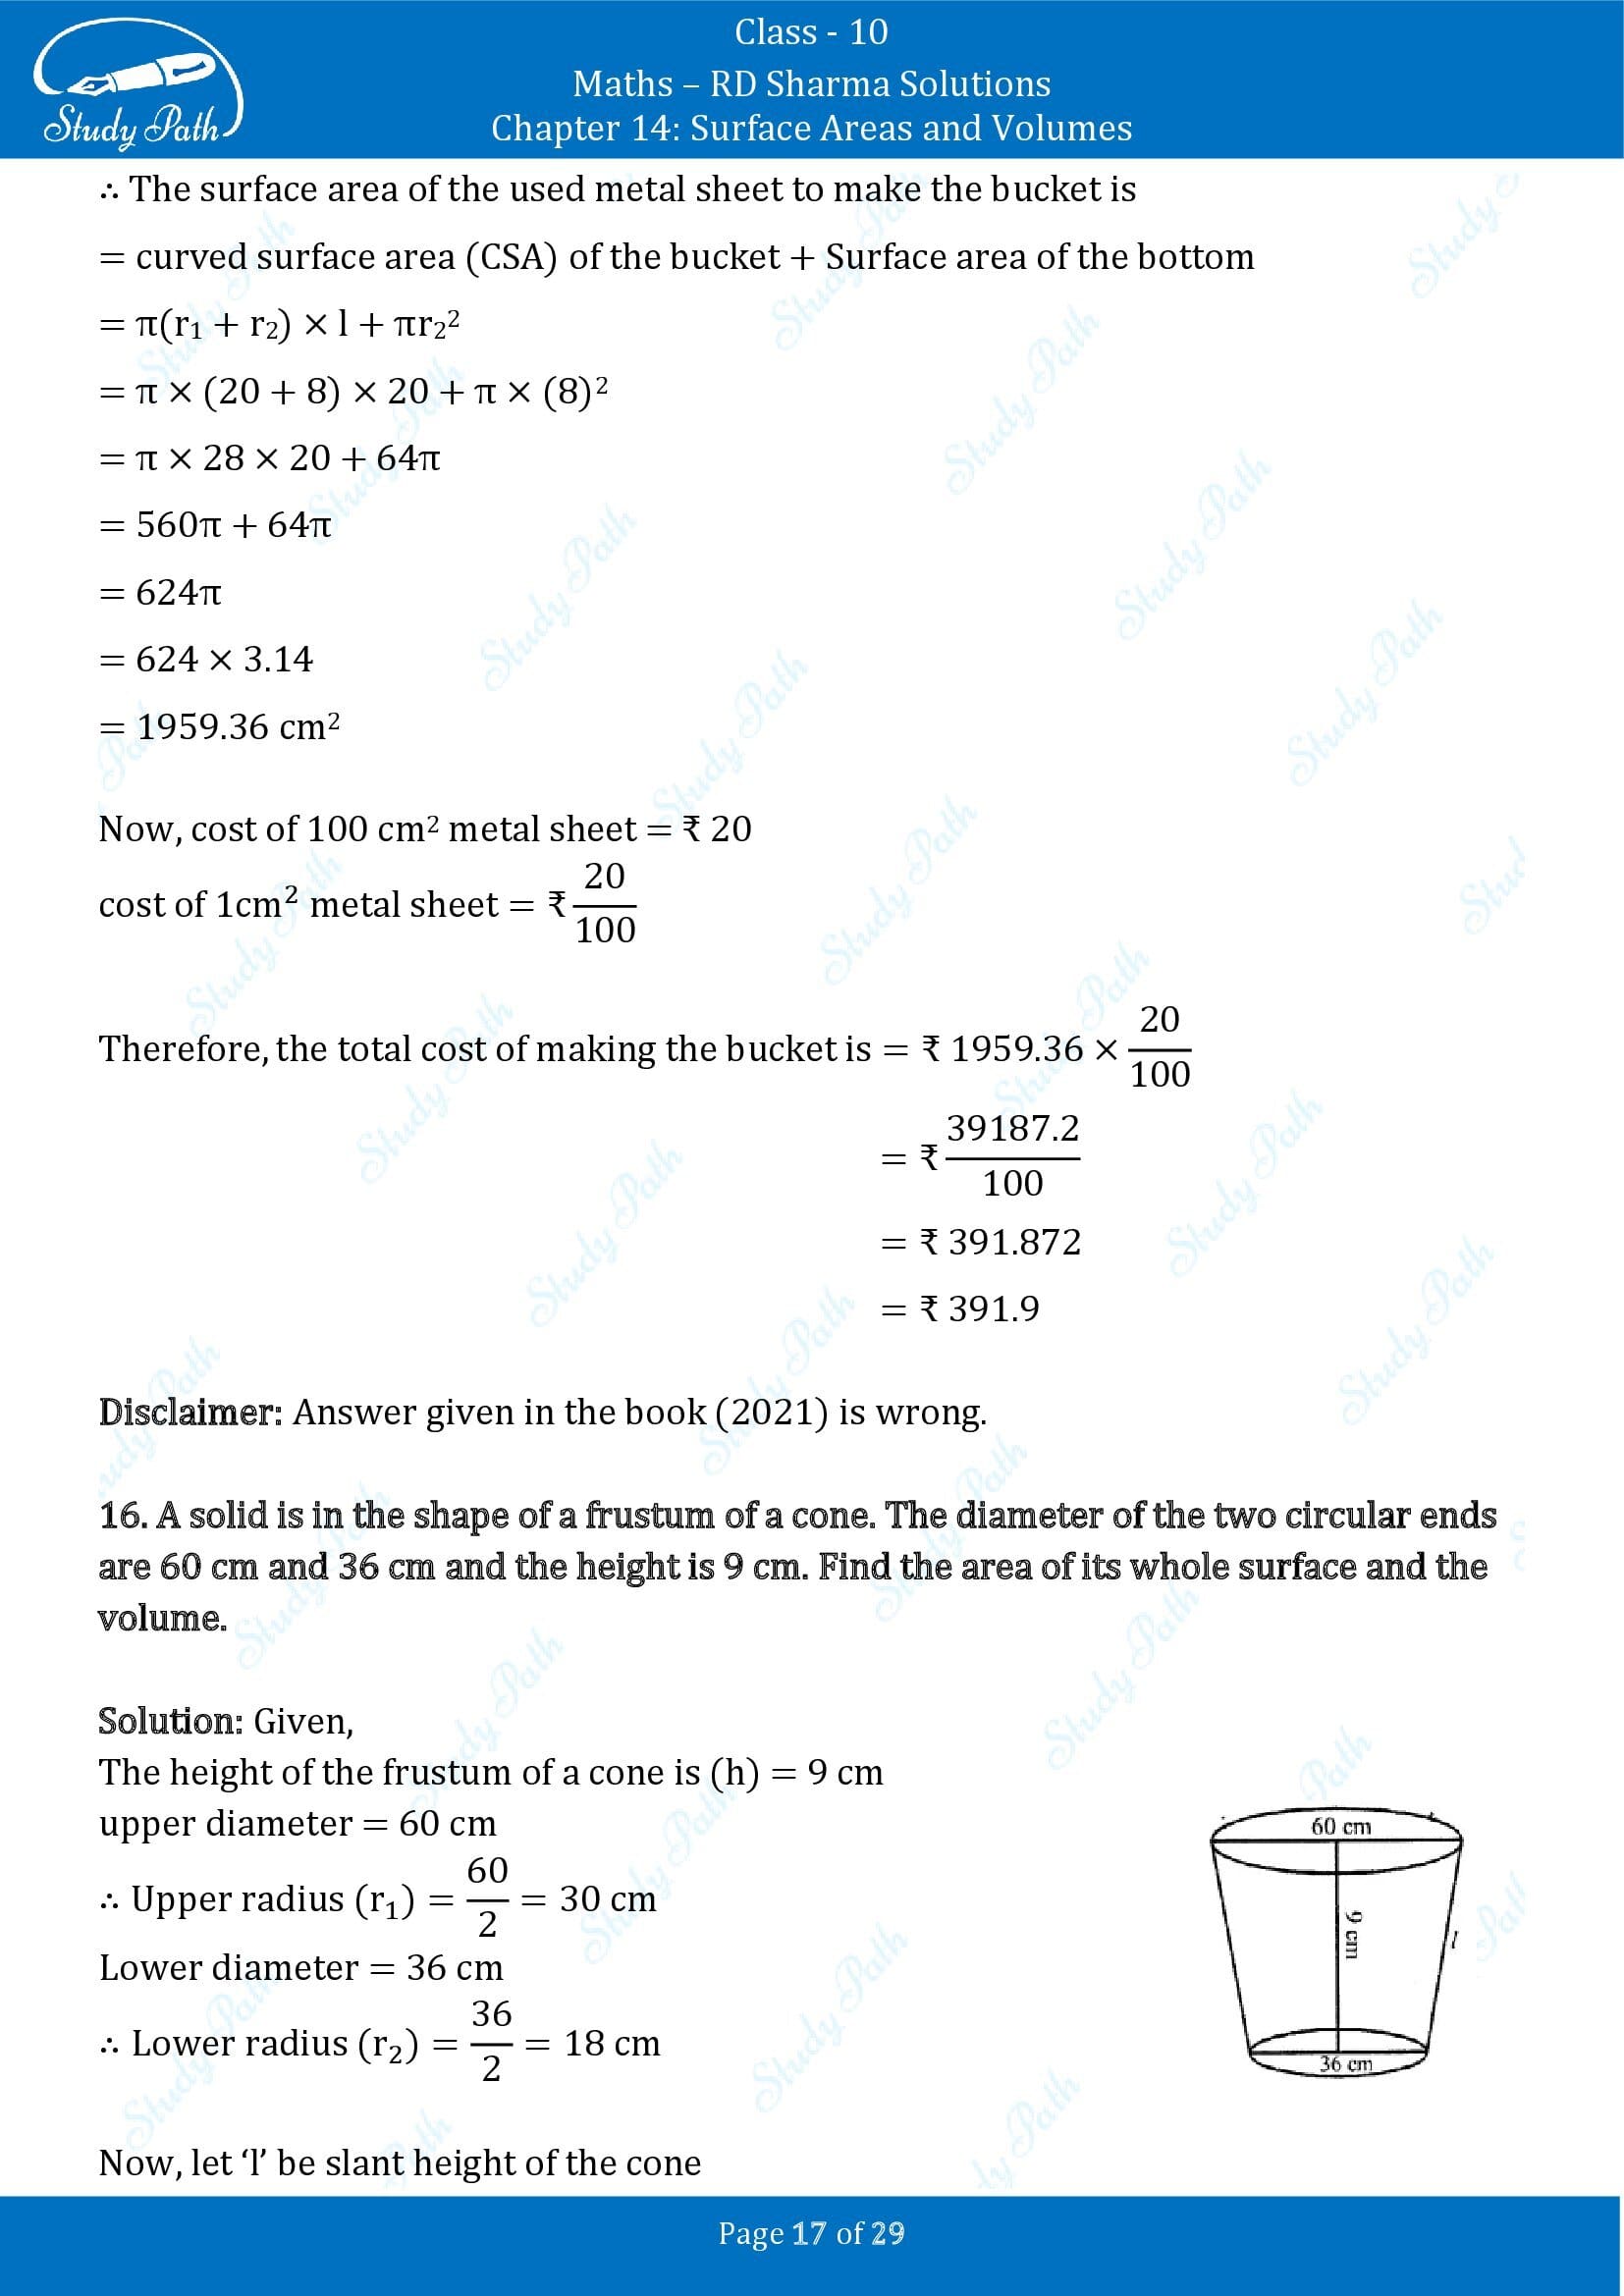 RD Sharma Solutions Class 10 Chapter 14 Surface Areas and Volumes Exercise 14.3 00017